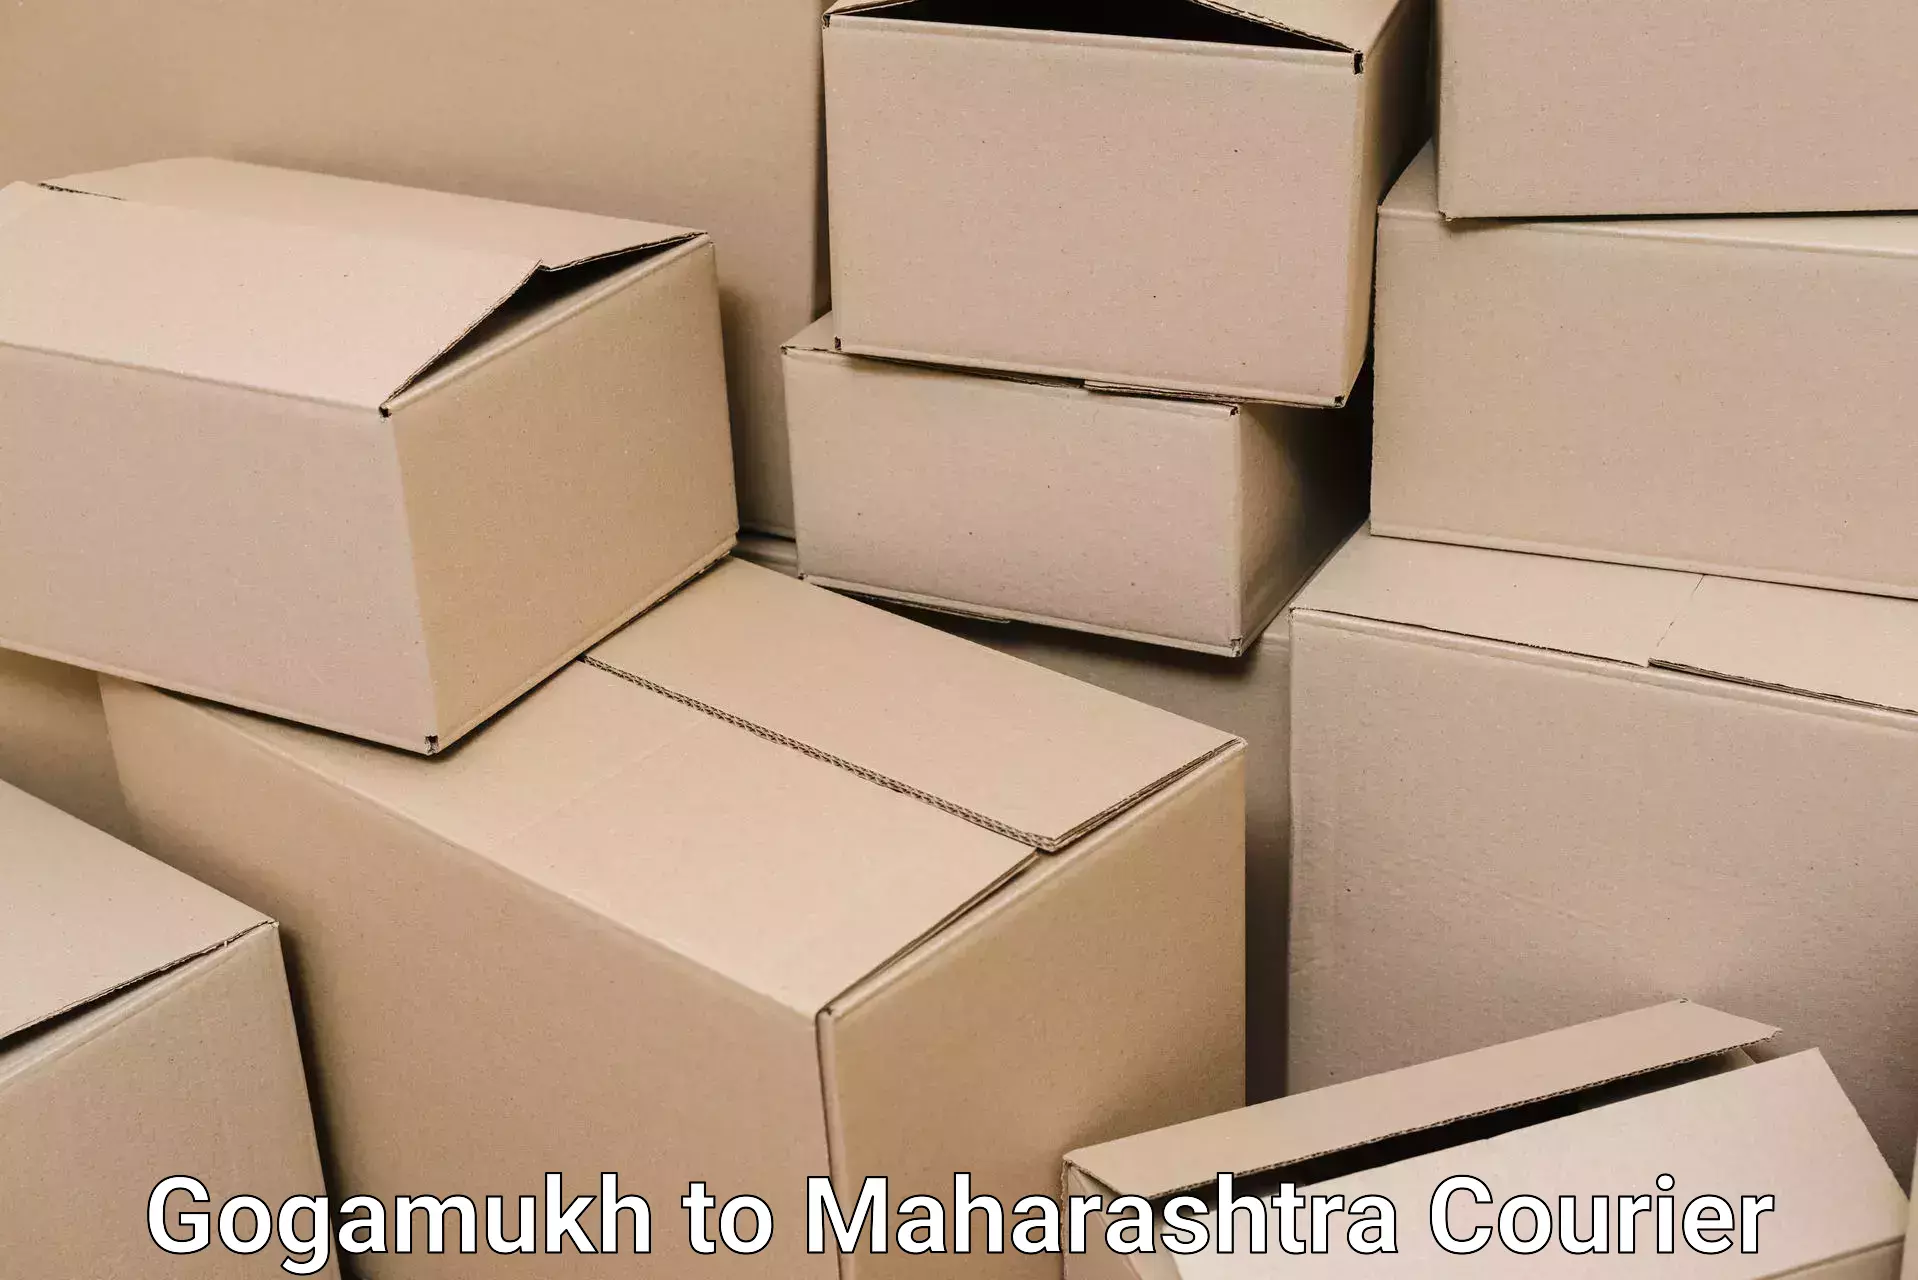 Trusted furniture movers in Gogamukh to Osmanabad